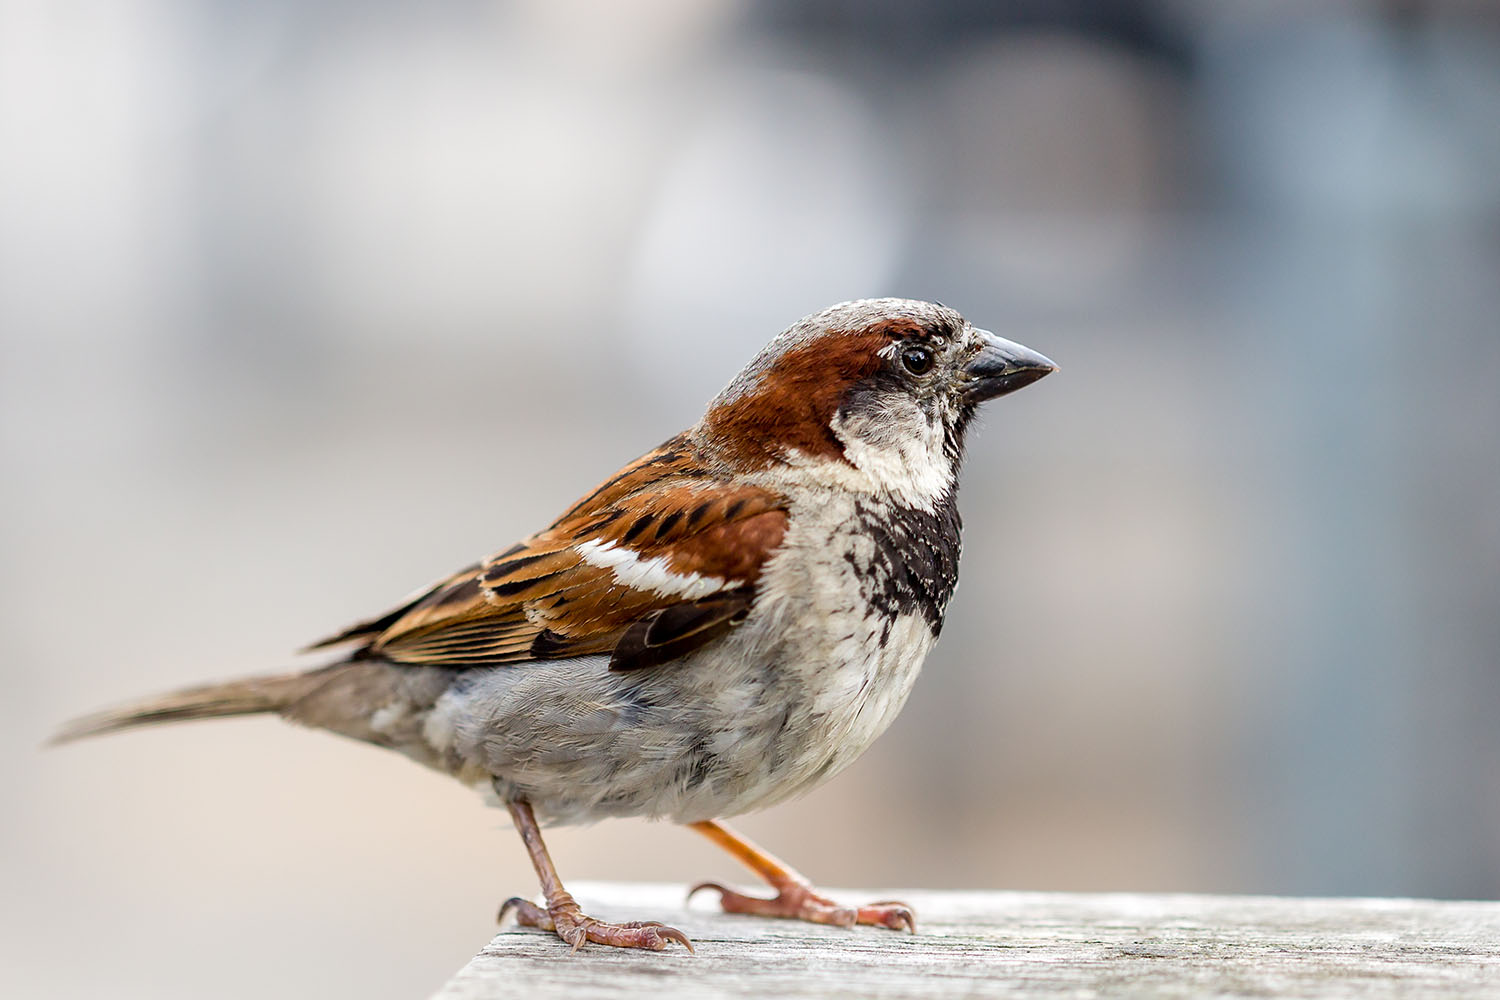 House sparrow on wooden table